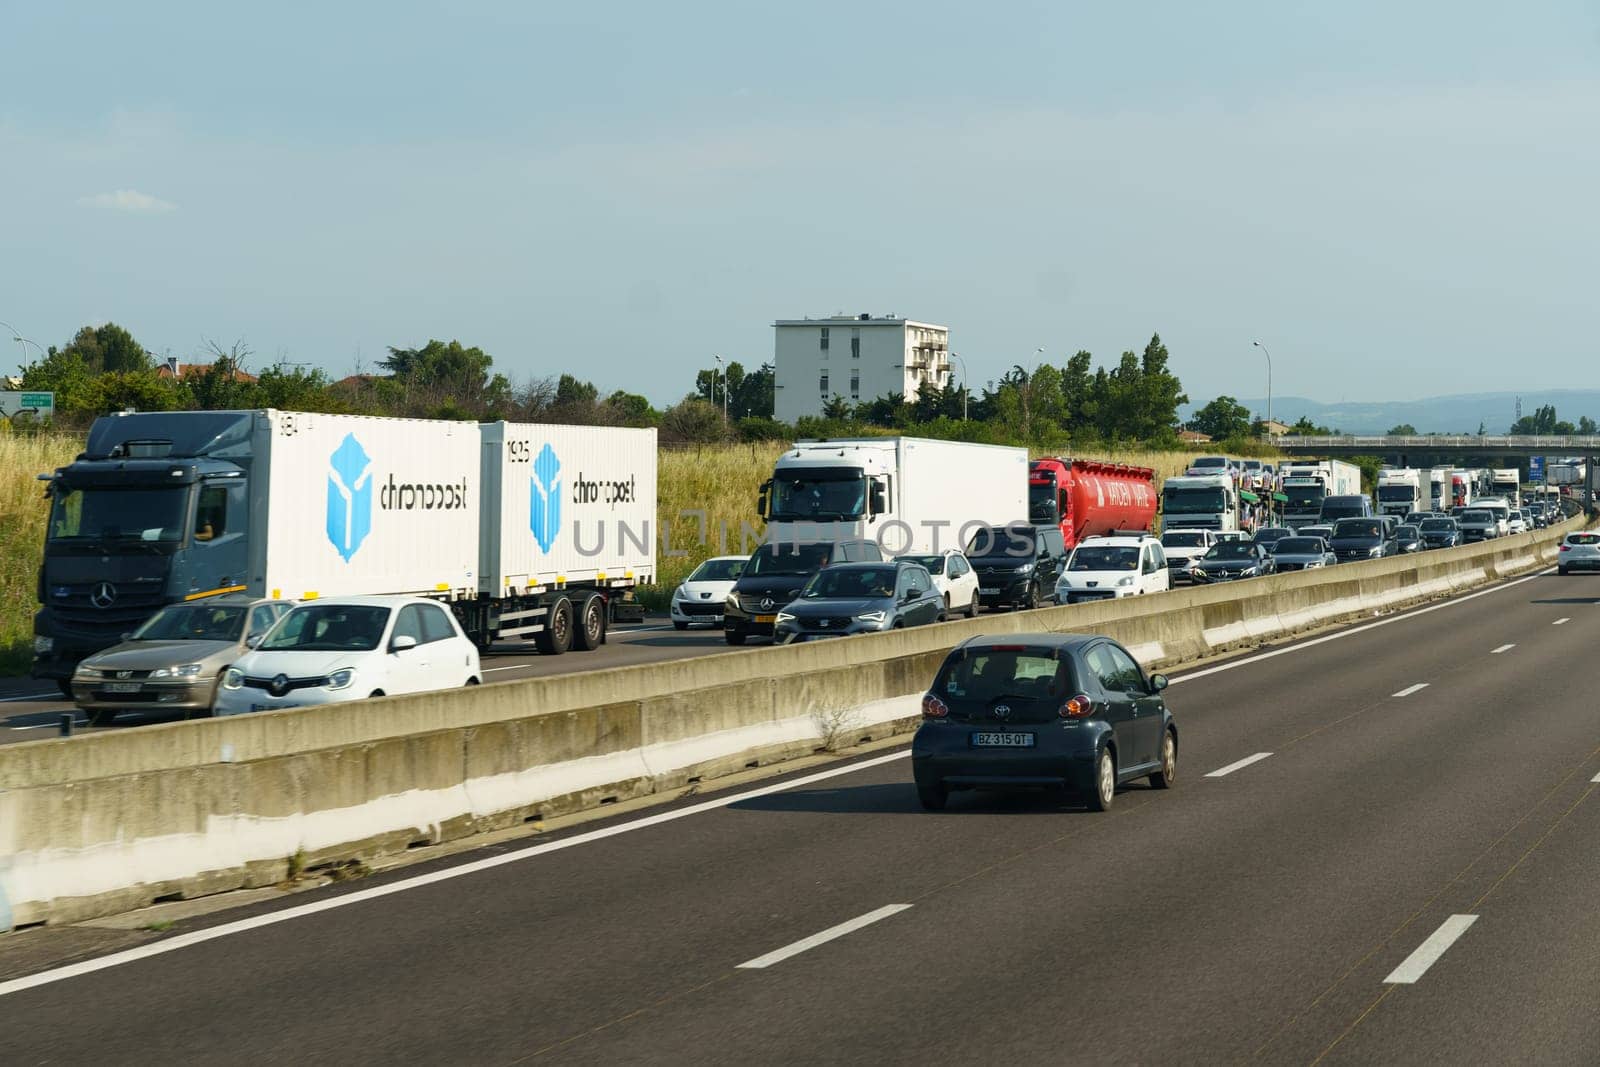 Vaugry Gard, France - May 30, 2023: A congested highway filled with heavy traffic runs alongside towering urban buildings, showcasing the hustle and bustle of city life.